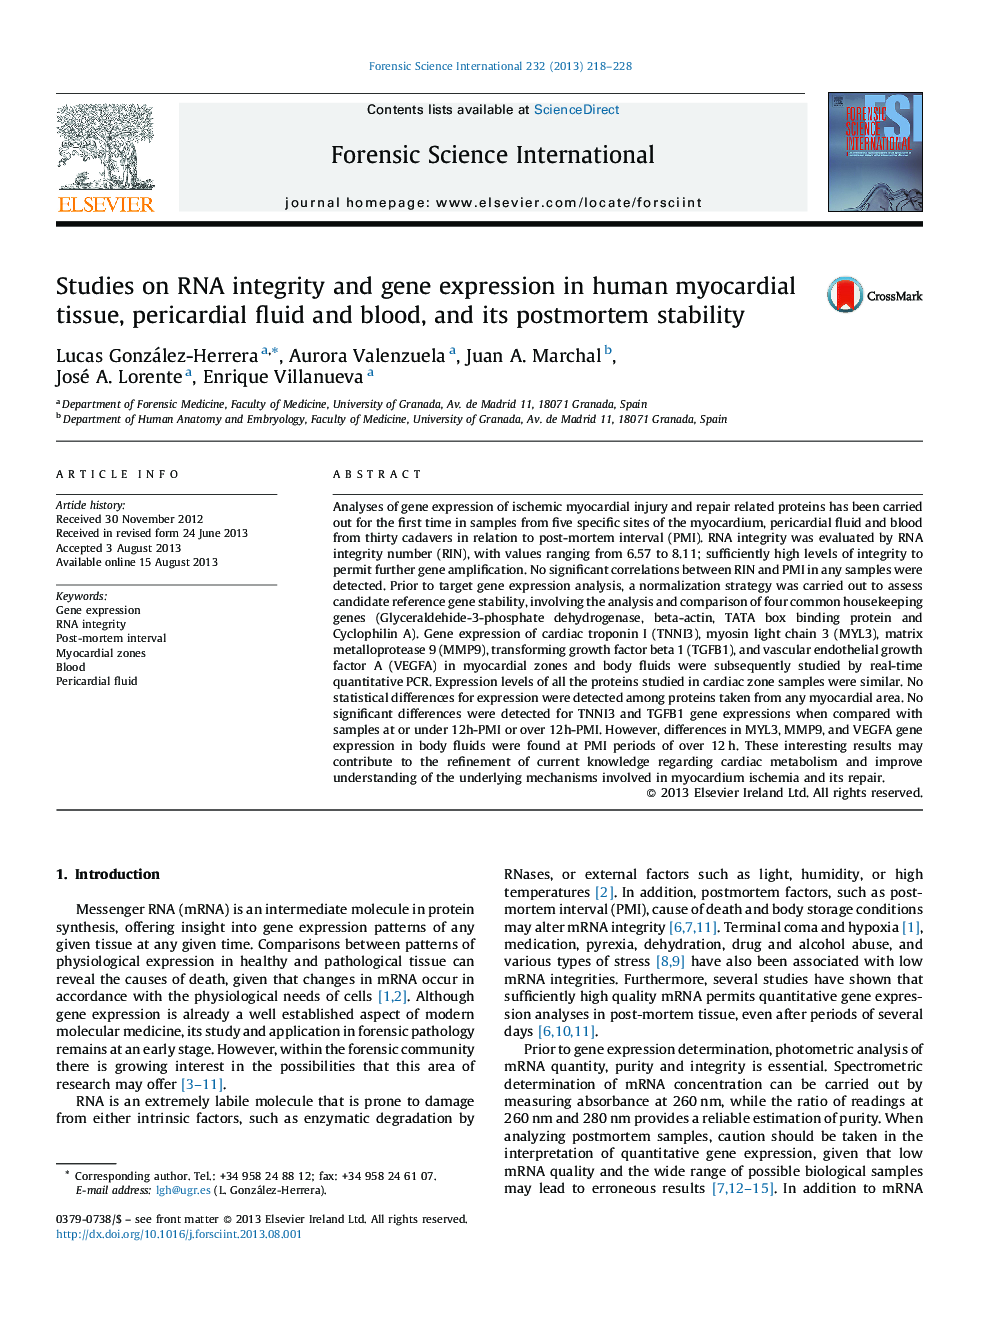 Studies on RNA integrity and gene expression in human myocardial tissue, pericardial fluid and blood, and its postmortem stability